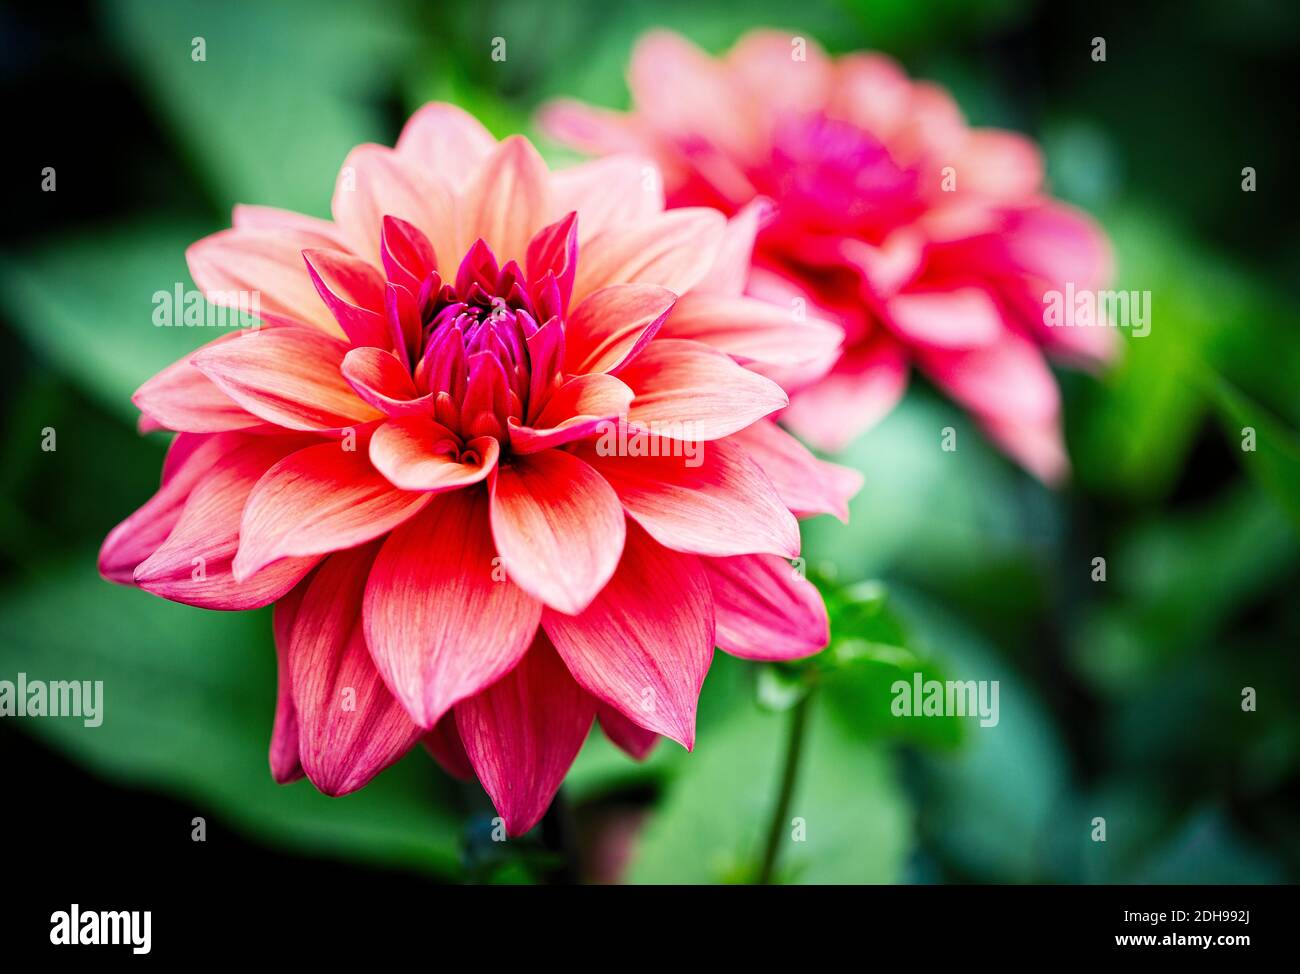 Dahlia, Pink coloured shaggy flower growing outdoor. Stock Photo